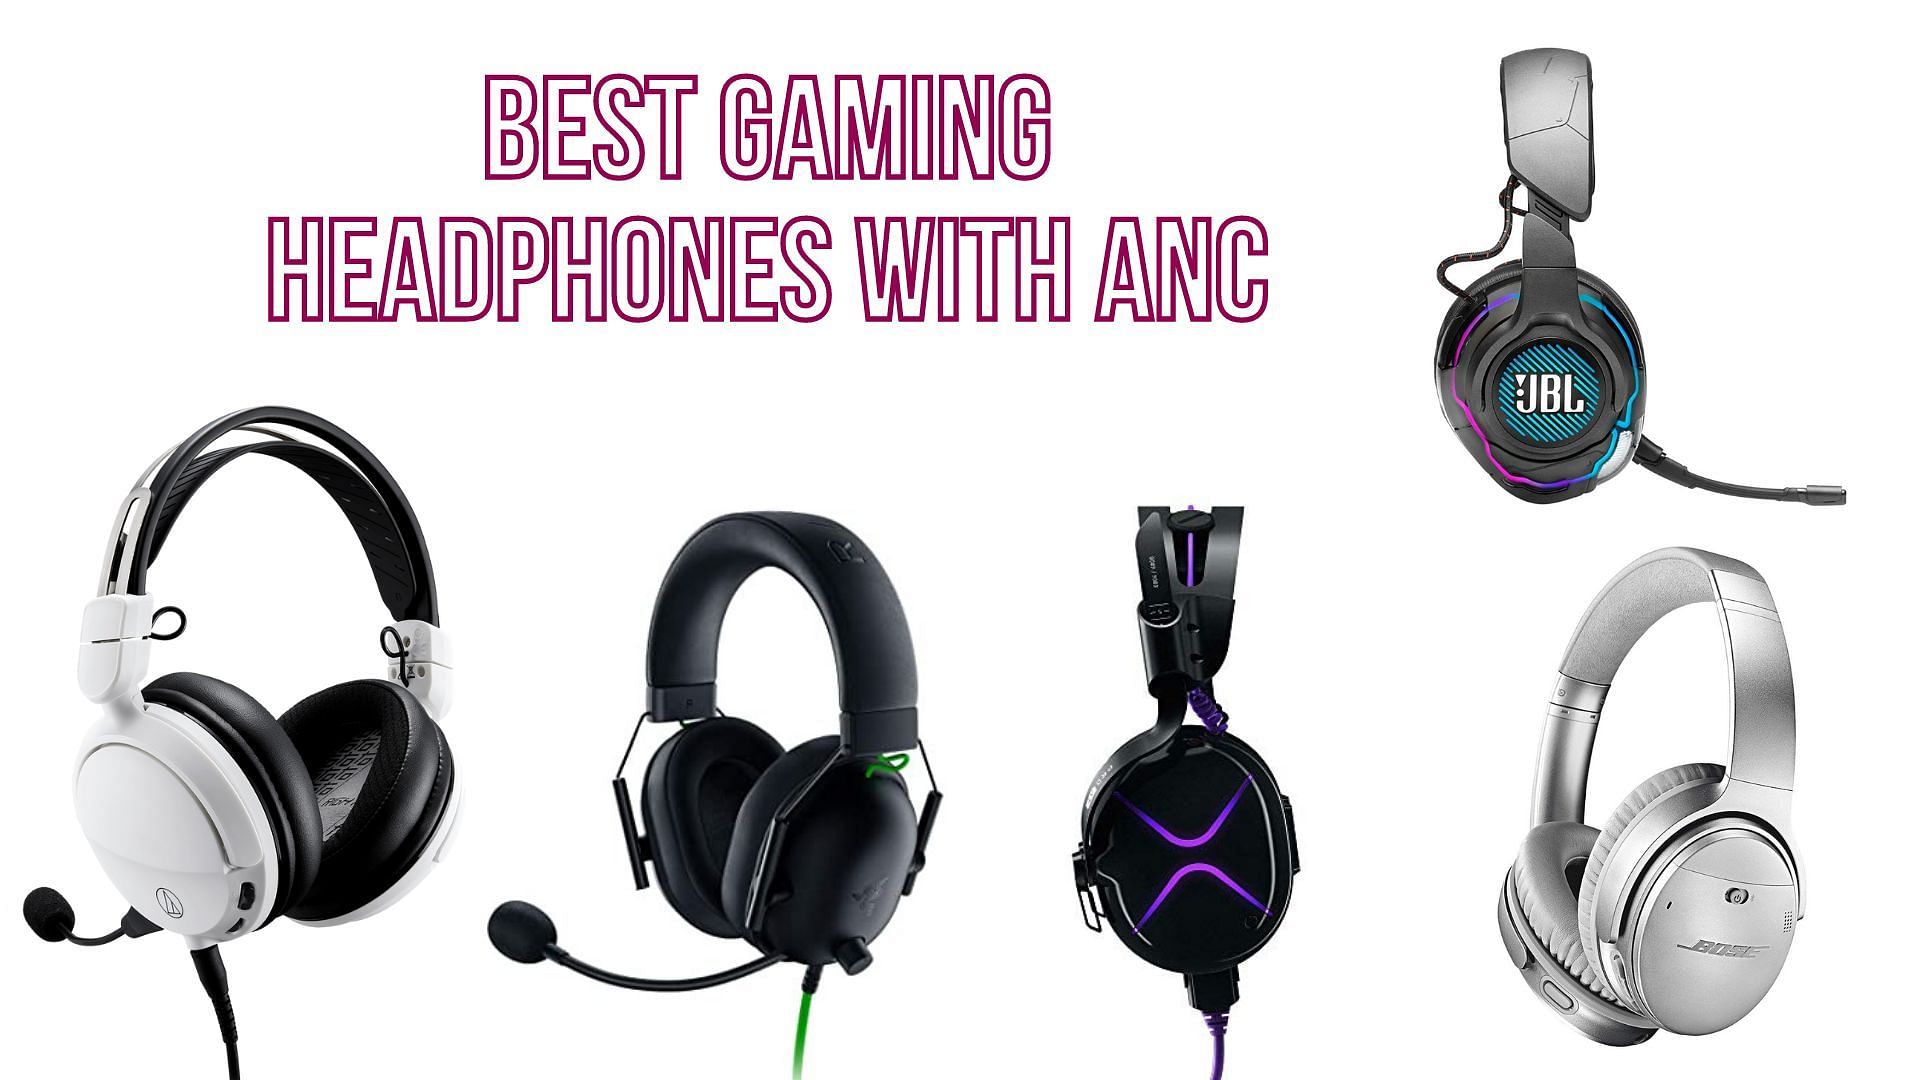 Gaming headphones offer something for everyone at all price points (Image via Sportskeeda)